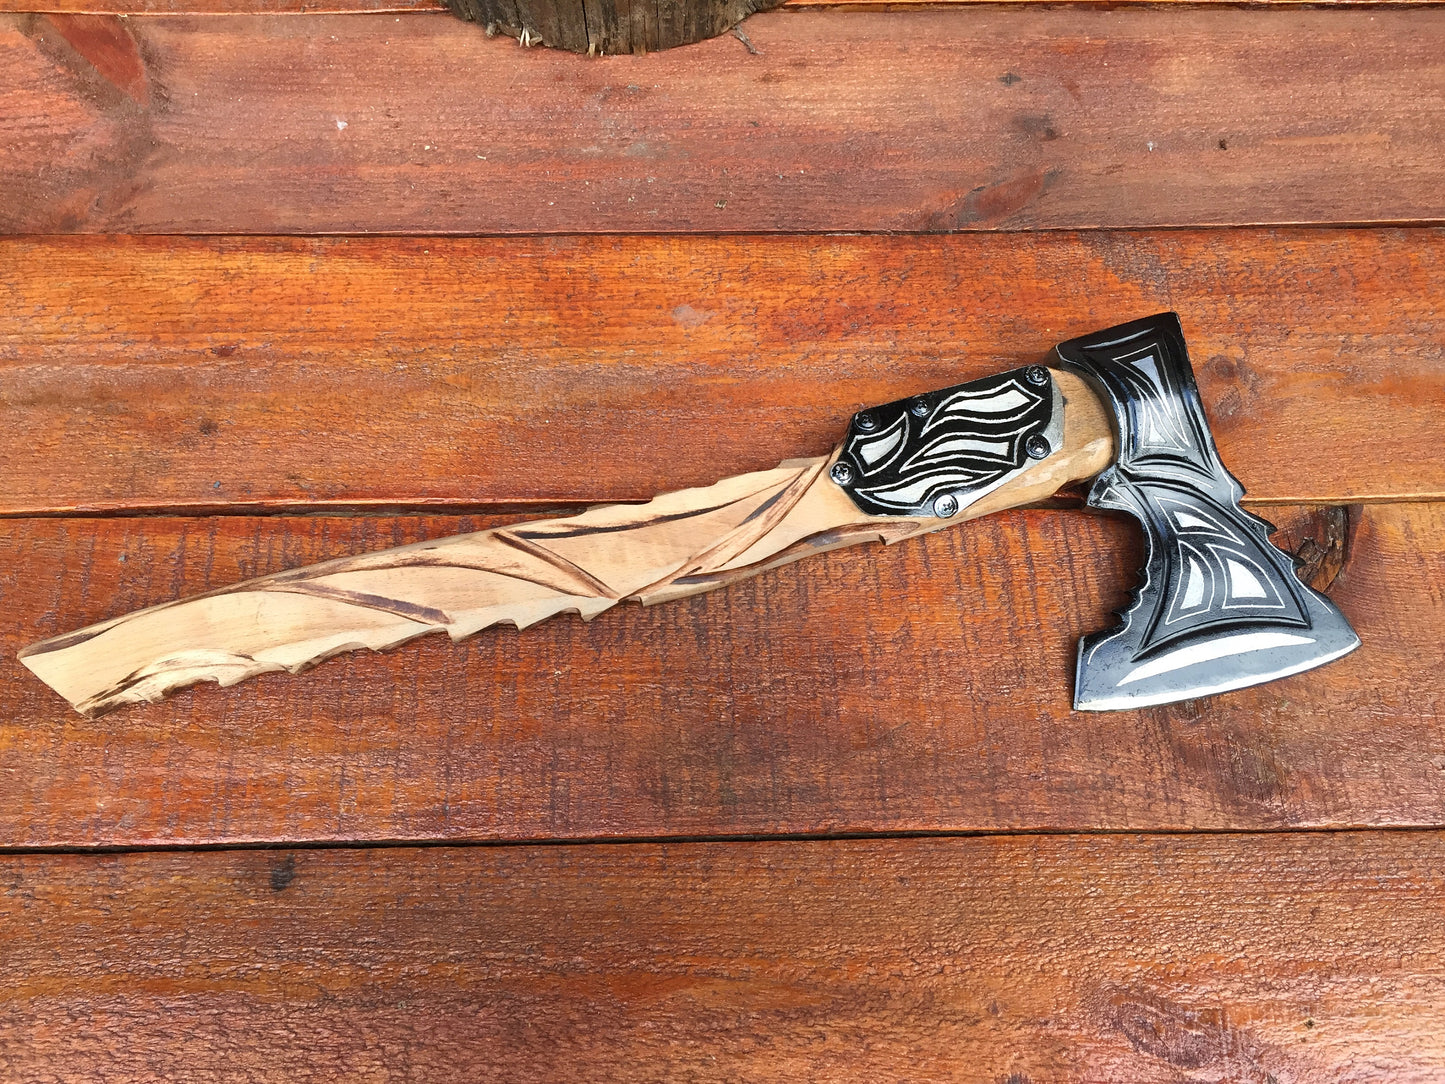 6th anniversary gift for him, iron anniversary gift for him, iron gift for him, handyman tool, viking axe, mens gifts, his birthday gift